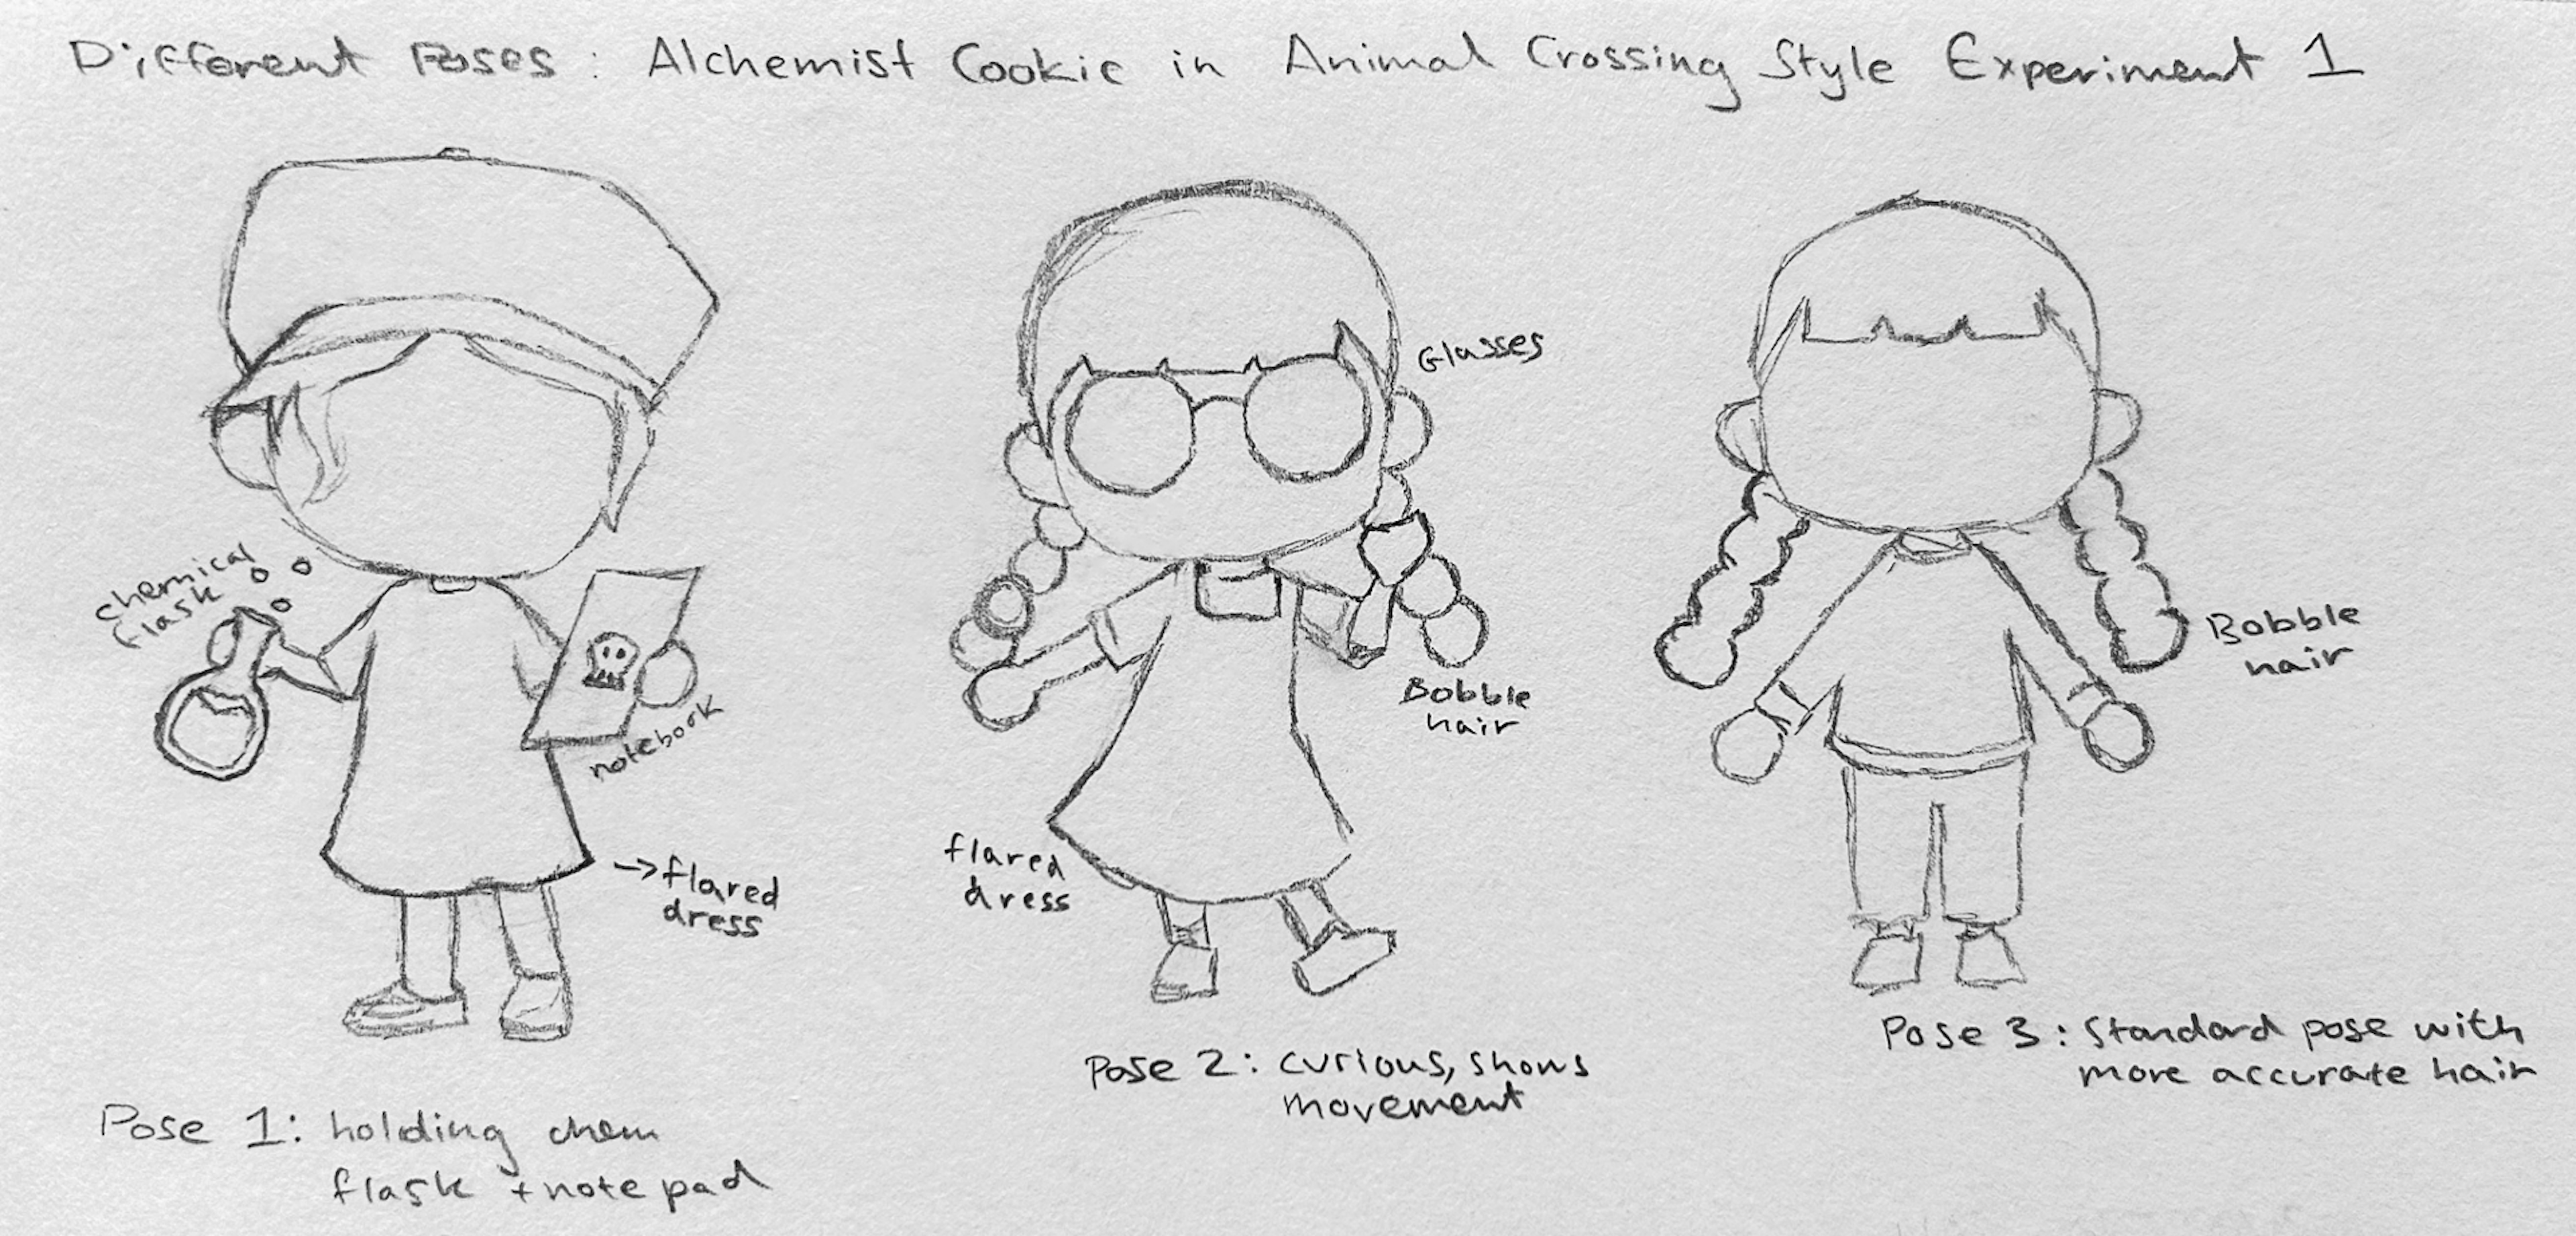 Drawing inspiration from key elements of Alchemy Cookie’s design, her inquisitive stance, beret and potion beaker, I integrated these features into the visual style of Animal Crossing characters through exploration of silhouettes, character-specific outfits and accessories.